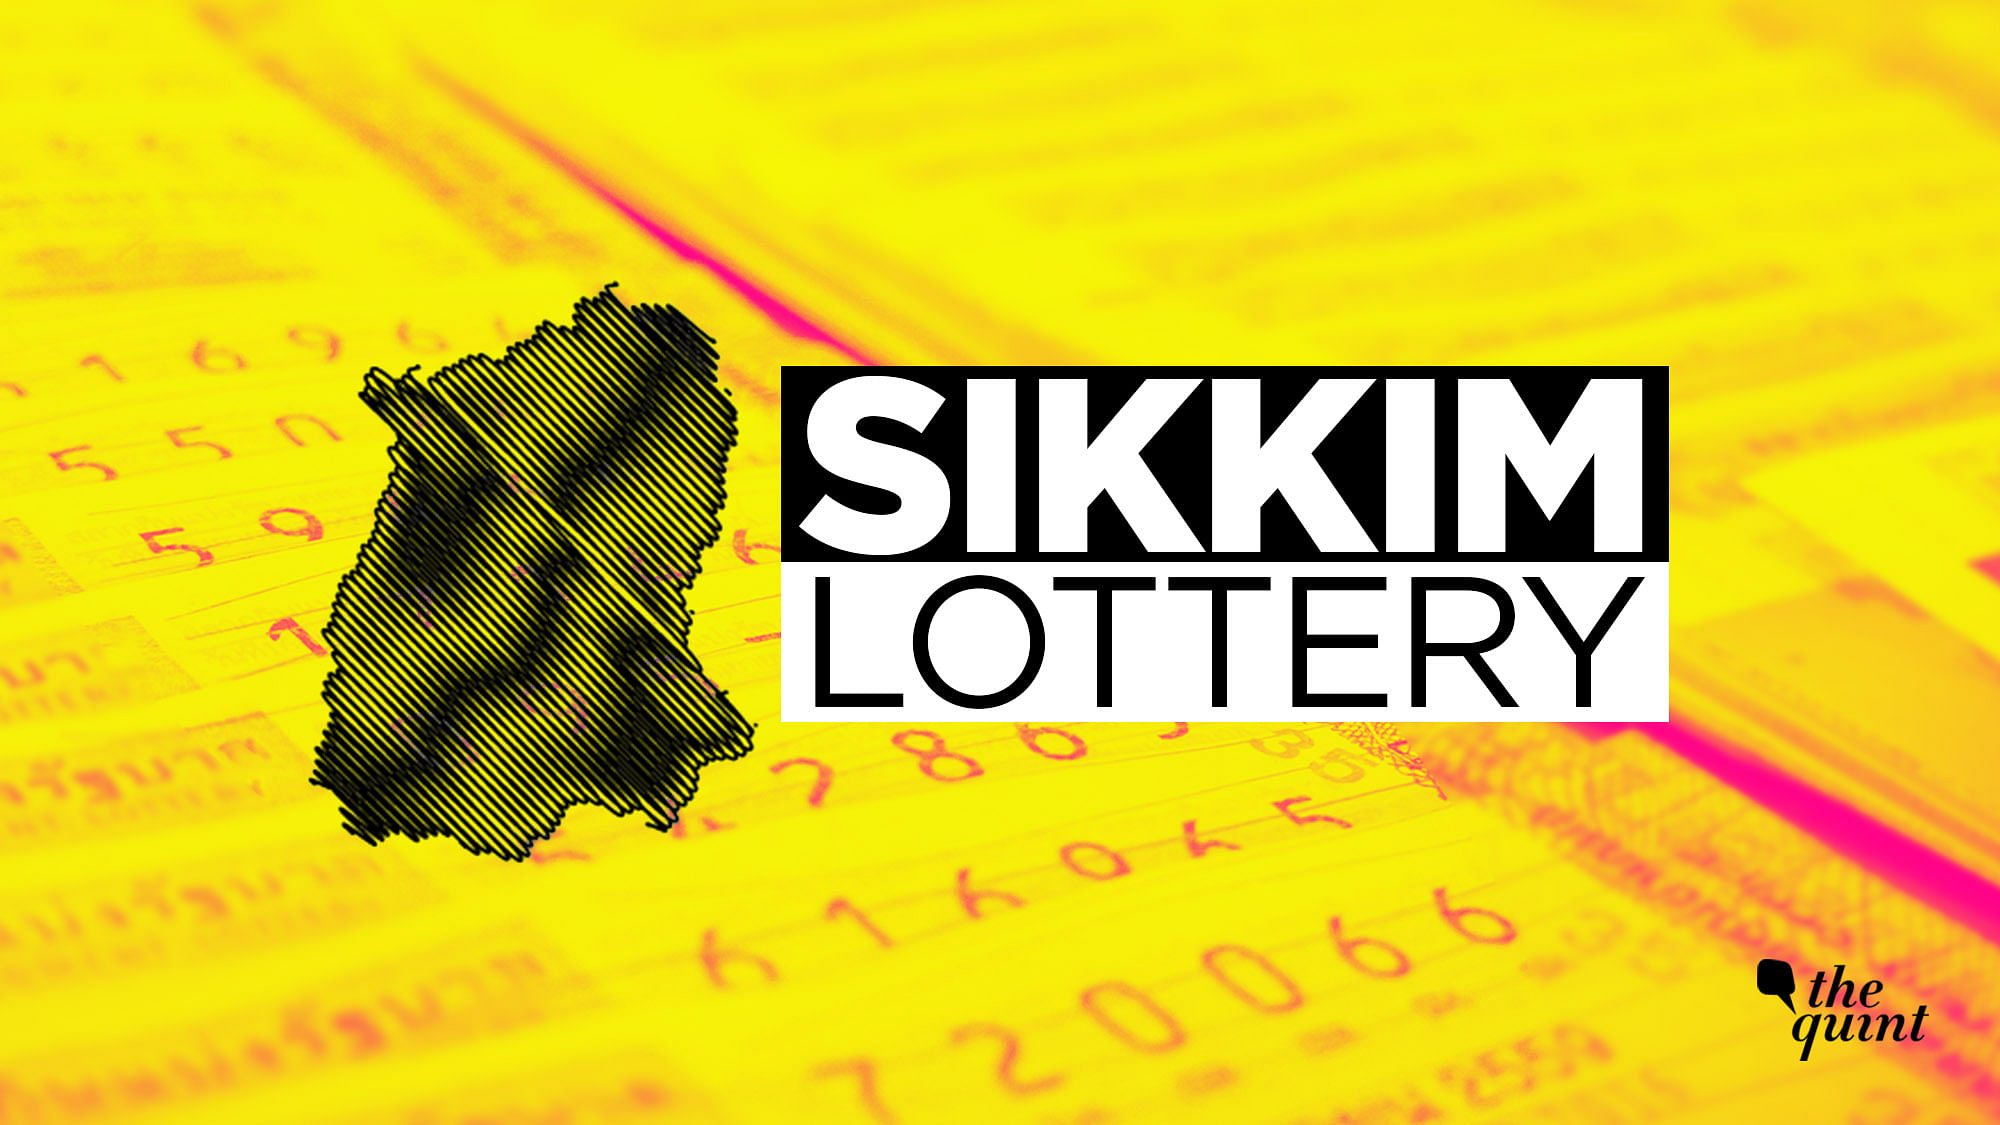 Lottery Sambad 29.8.2019 Result: The Sikkim lottery results has been declared at 11:55 am on 29 August 2019.